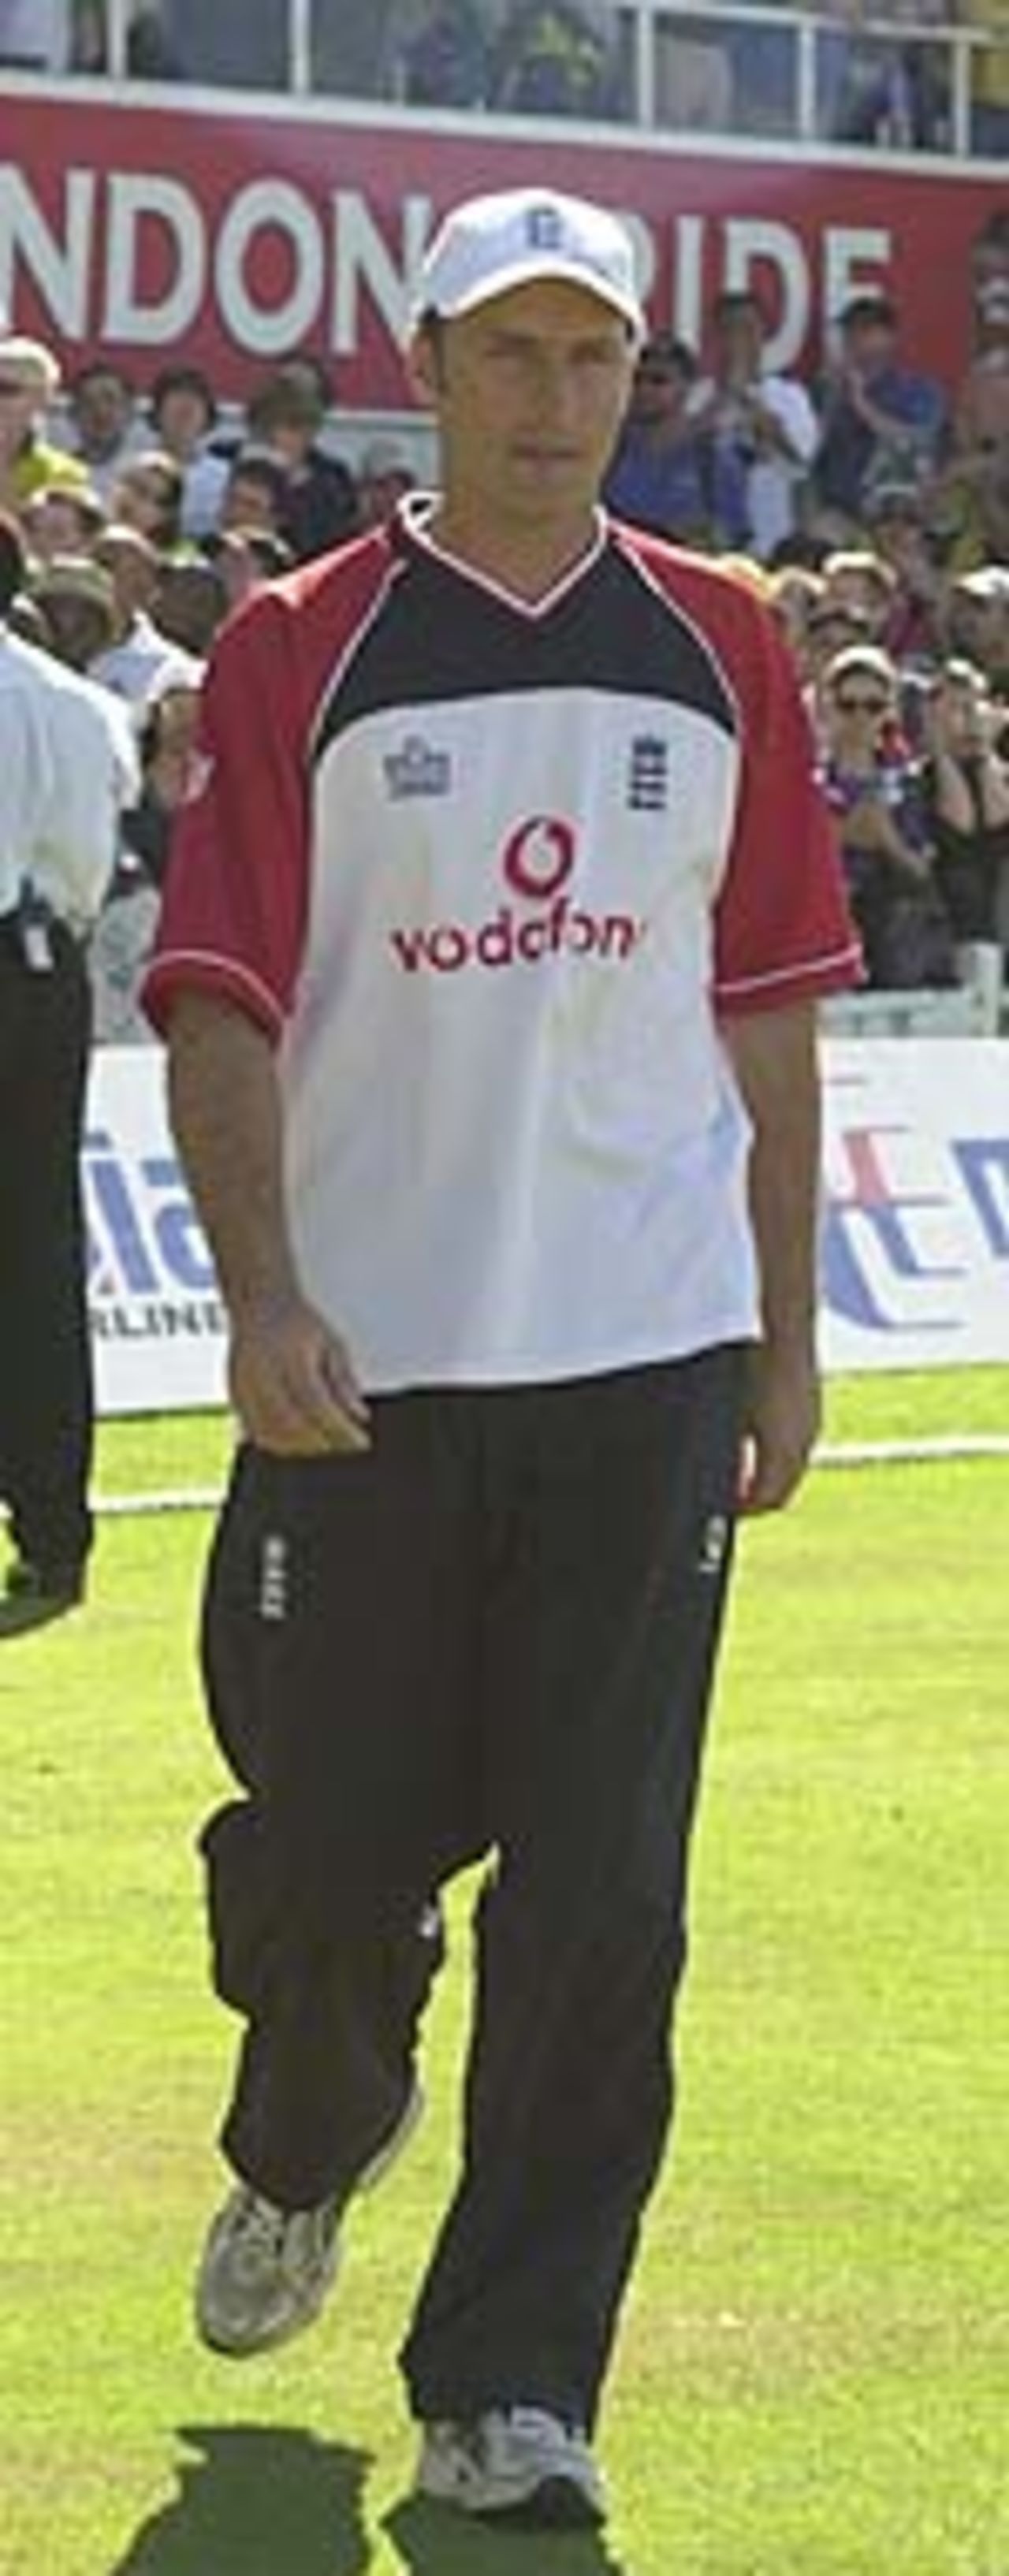 Taken at the Oval at the end of the Ashes series 2001